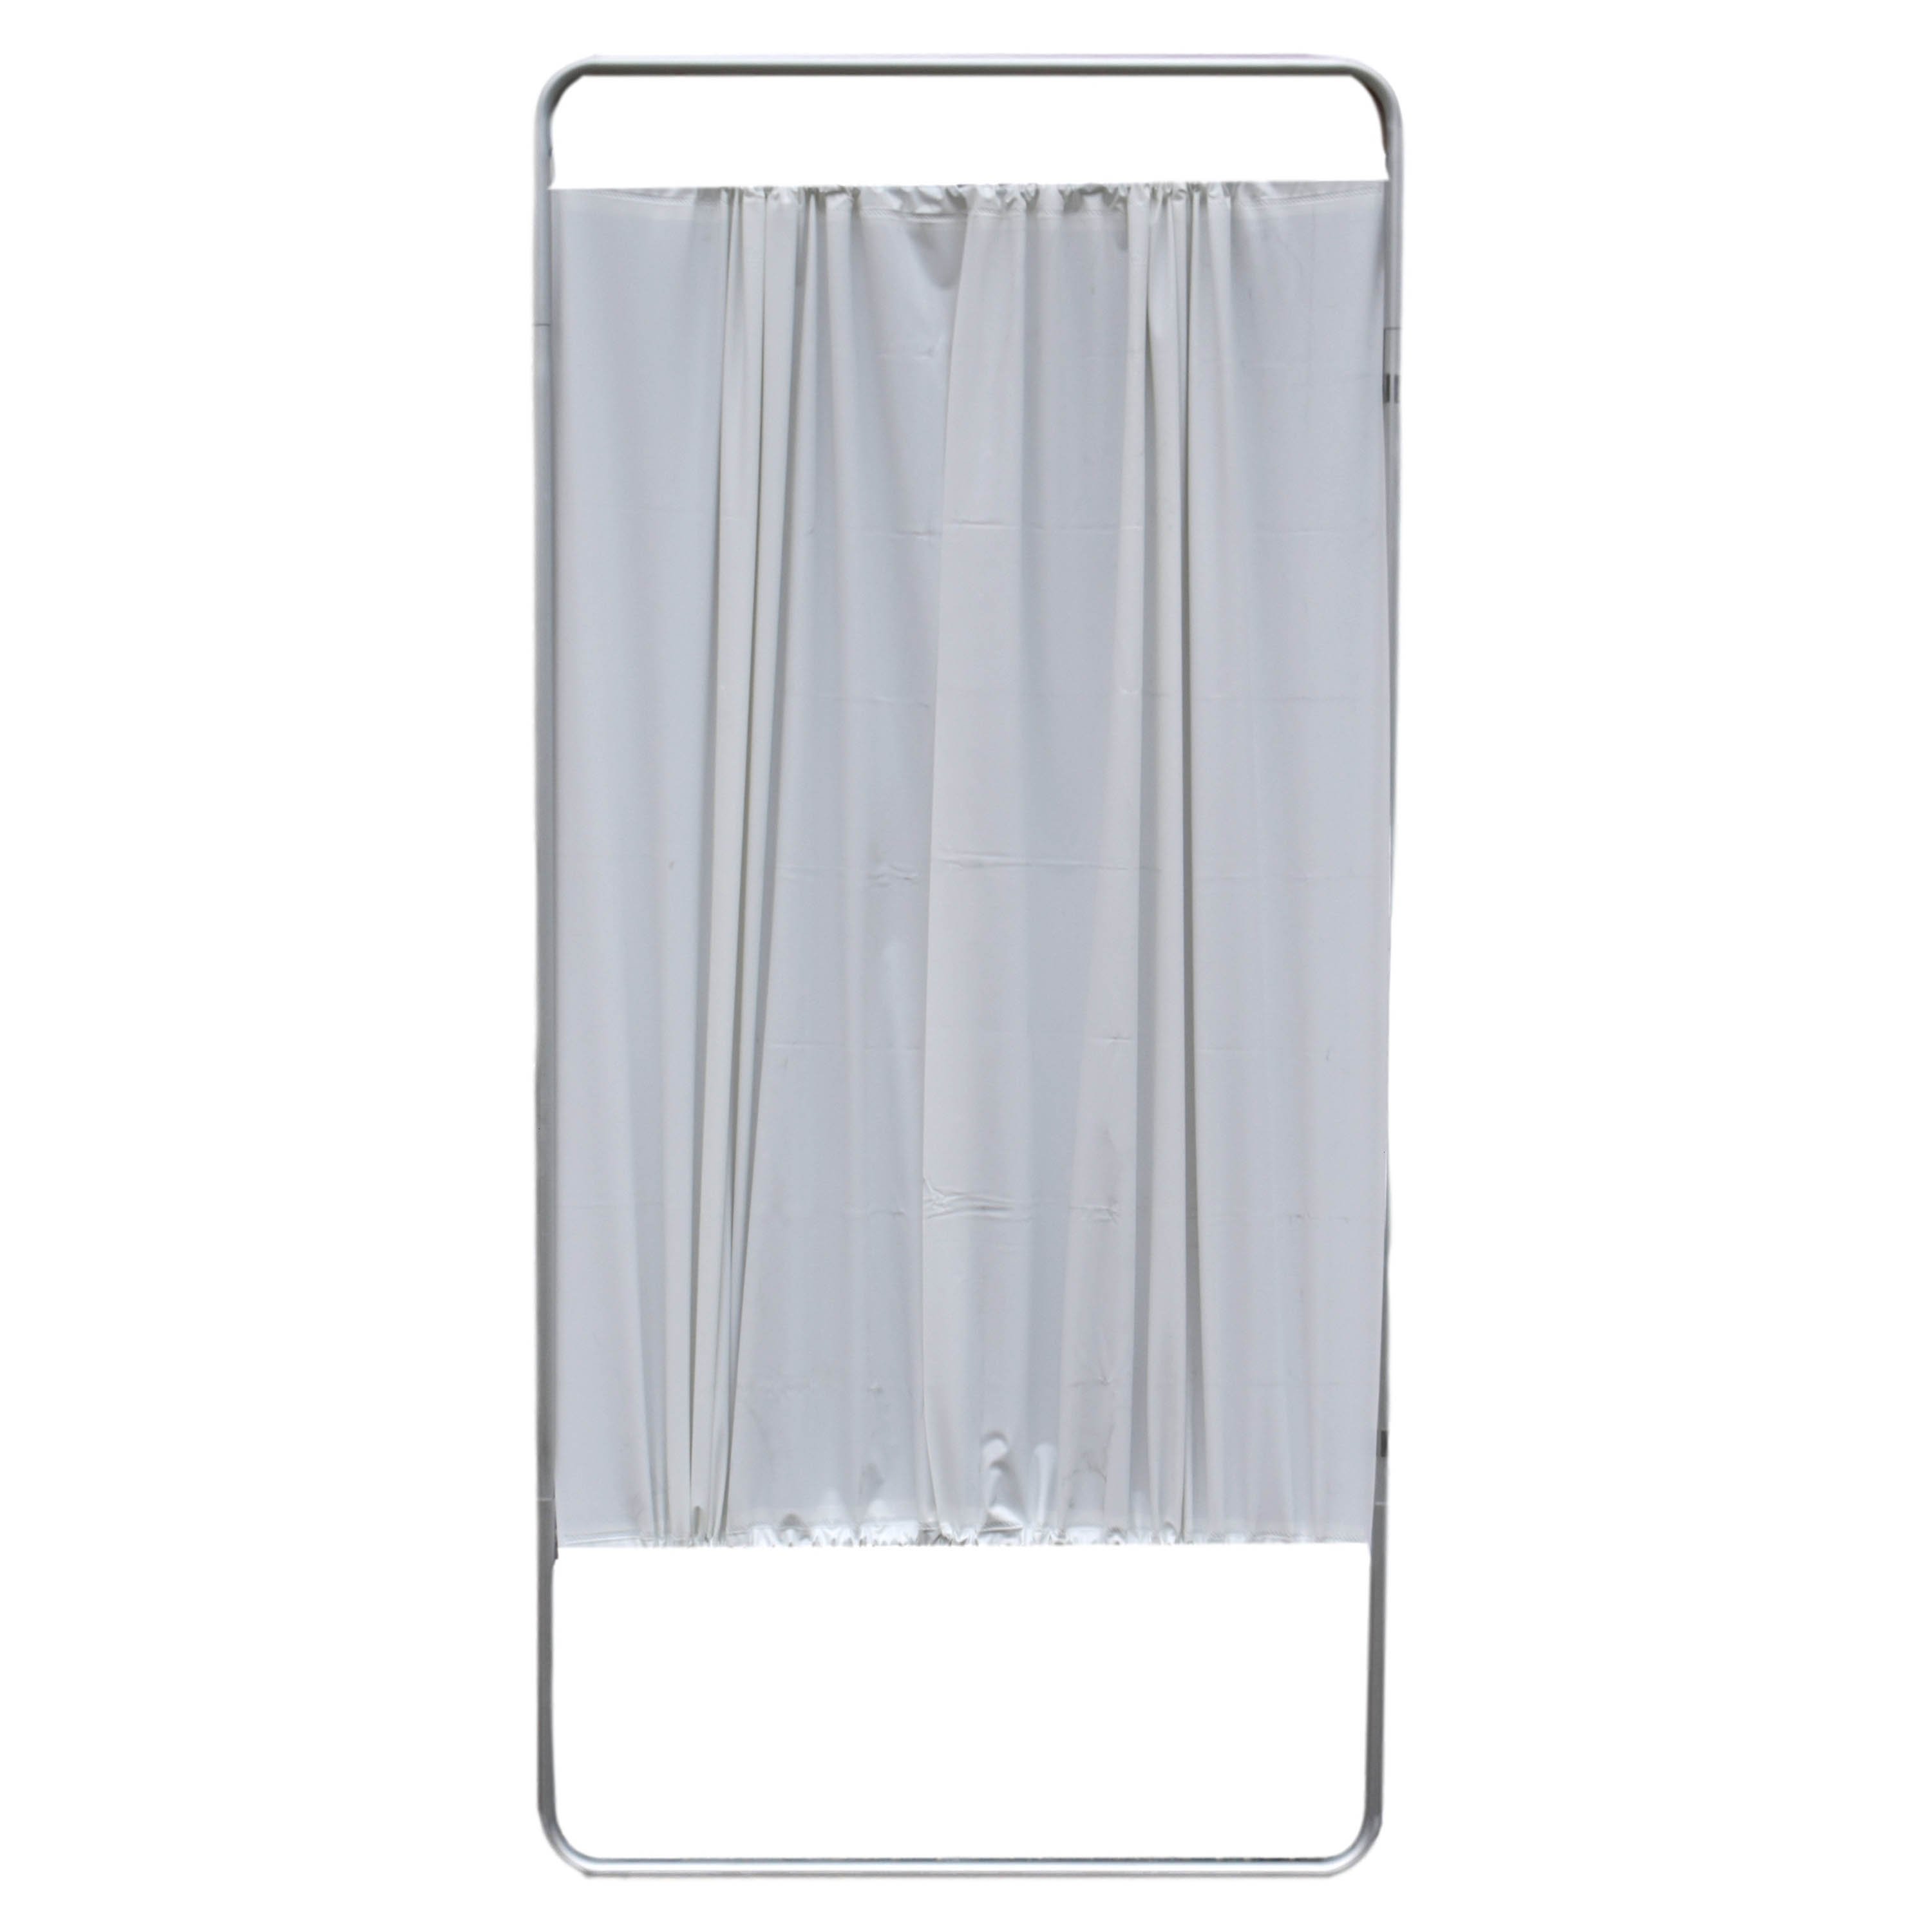 King Economy Privacy Screen with U-Hinge and White Vinyl Panel - 1 Section (Will Not Stand on Its Own)